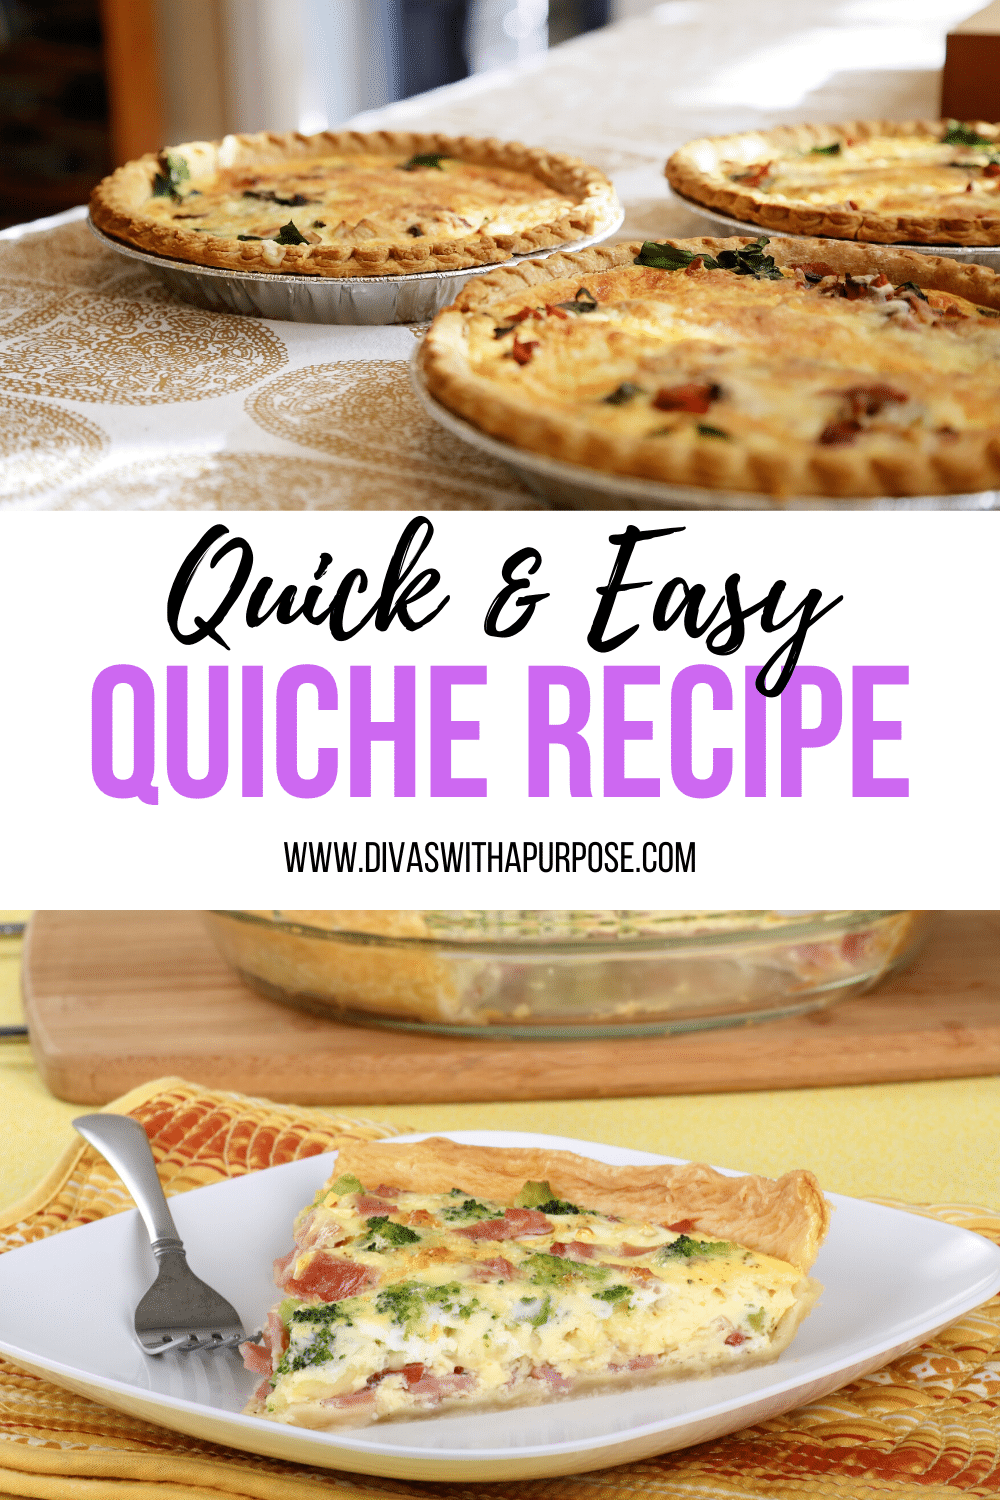 This quick and easy quiche recipe brings back fond memories of the dish my mother would make on Sunday mornings. #easyrecipes #quiche #brunchrecipes